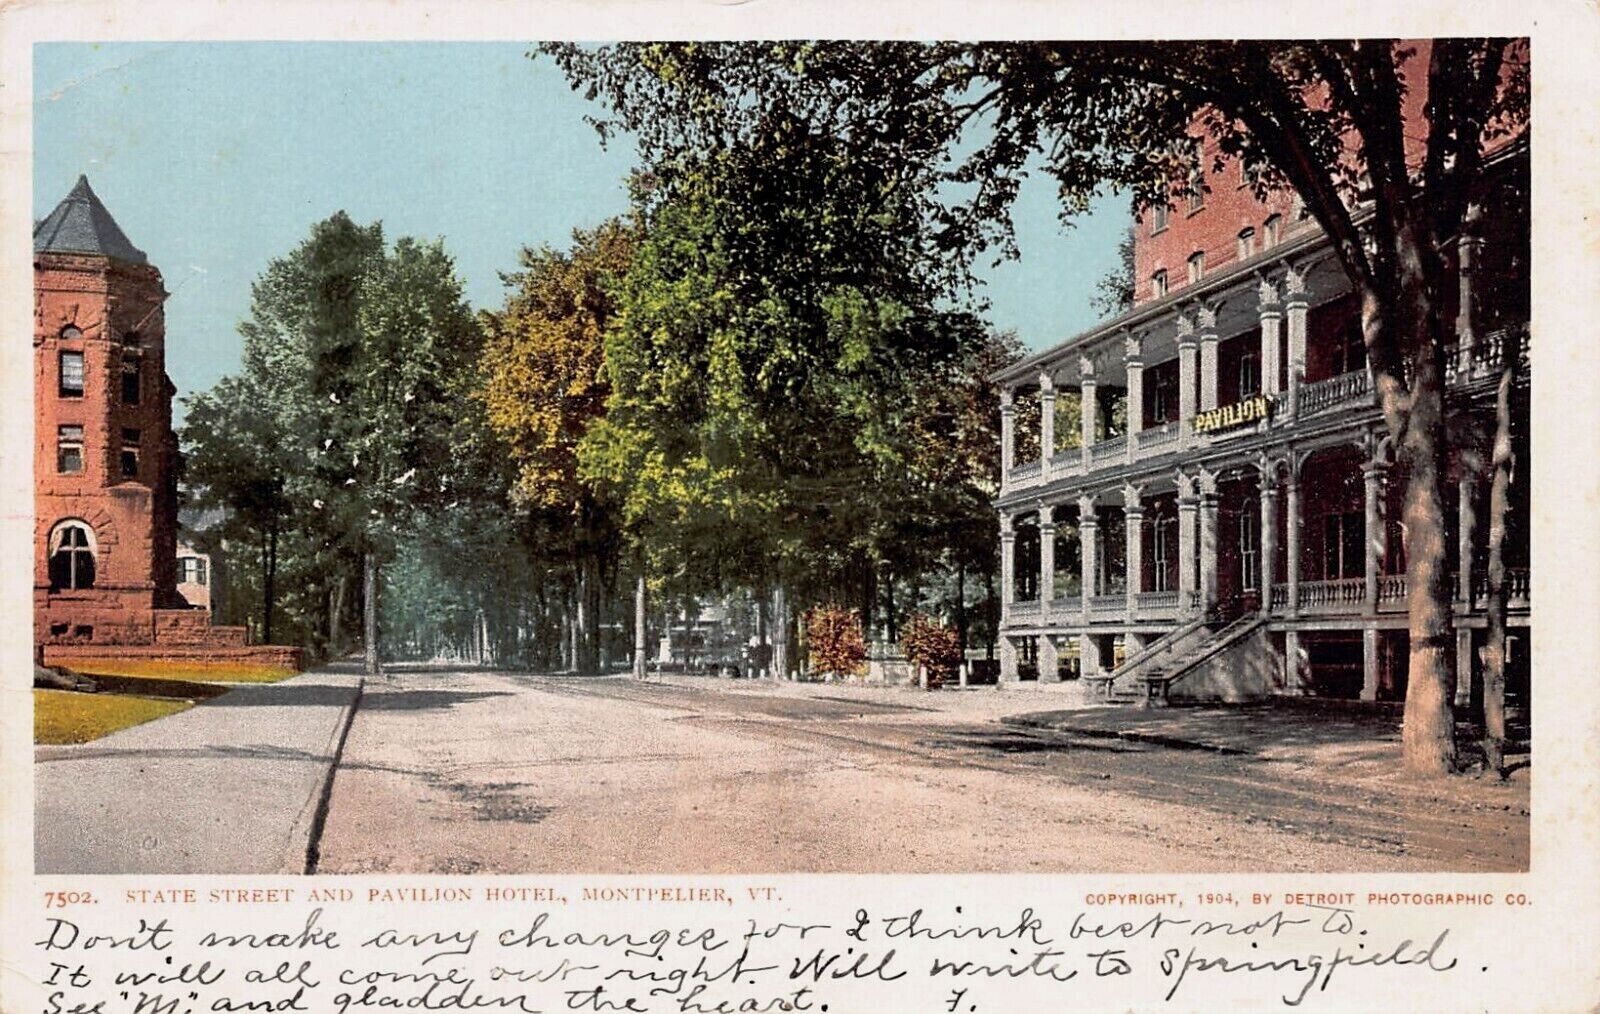 State Street and Pavilion Hotel, Montpielier, VT, 1904 Postcard, Used in 1905